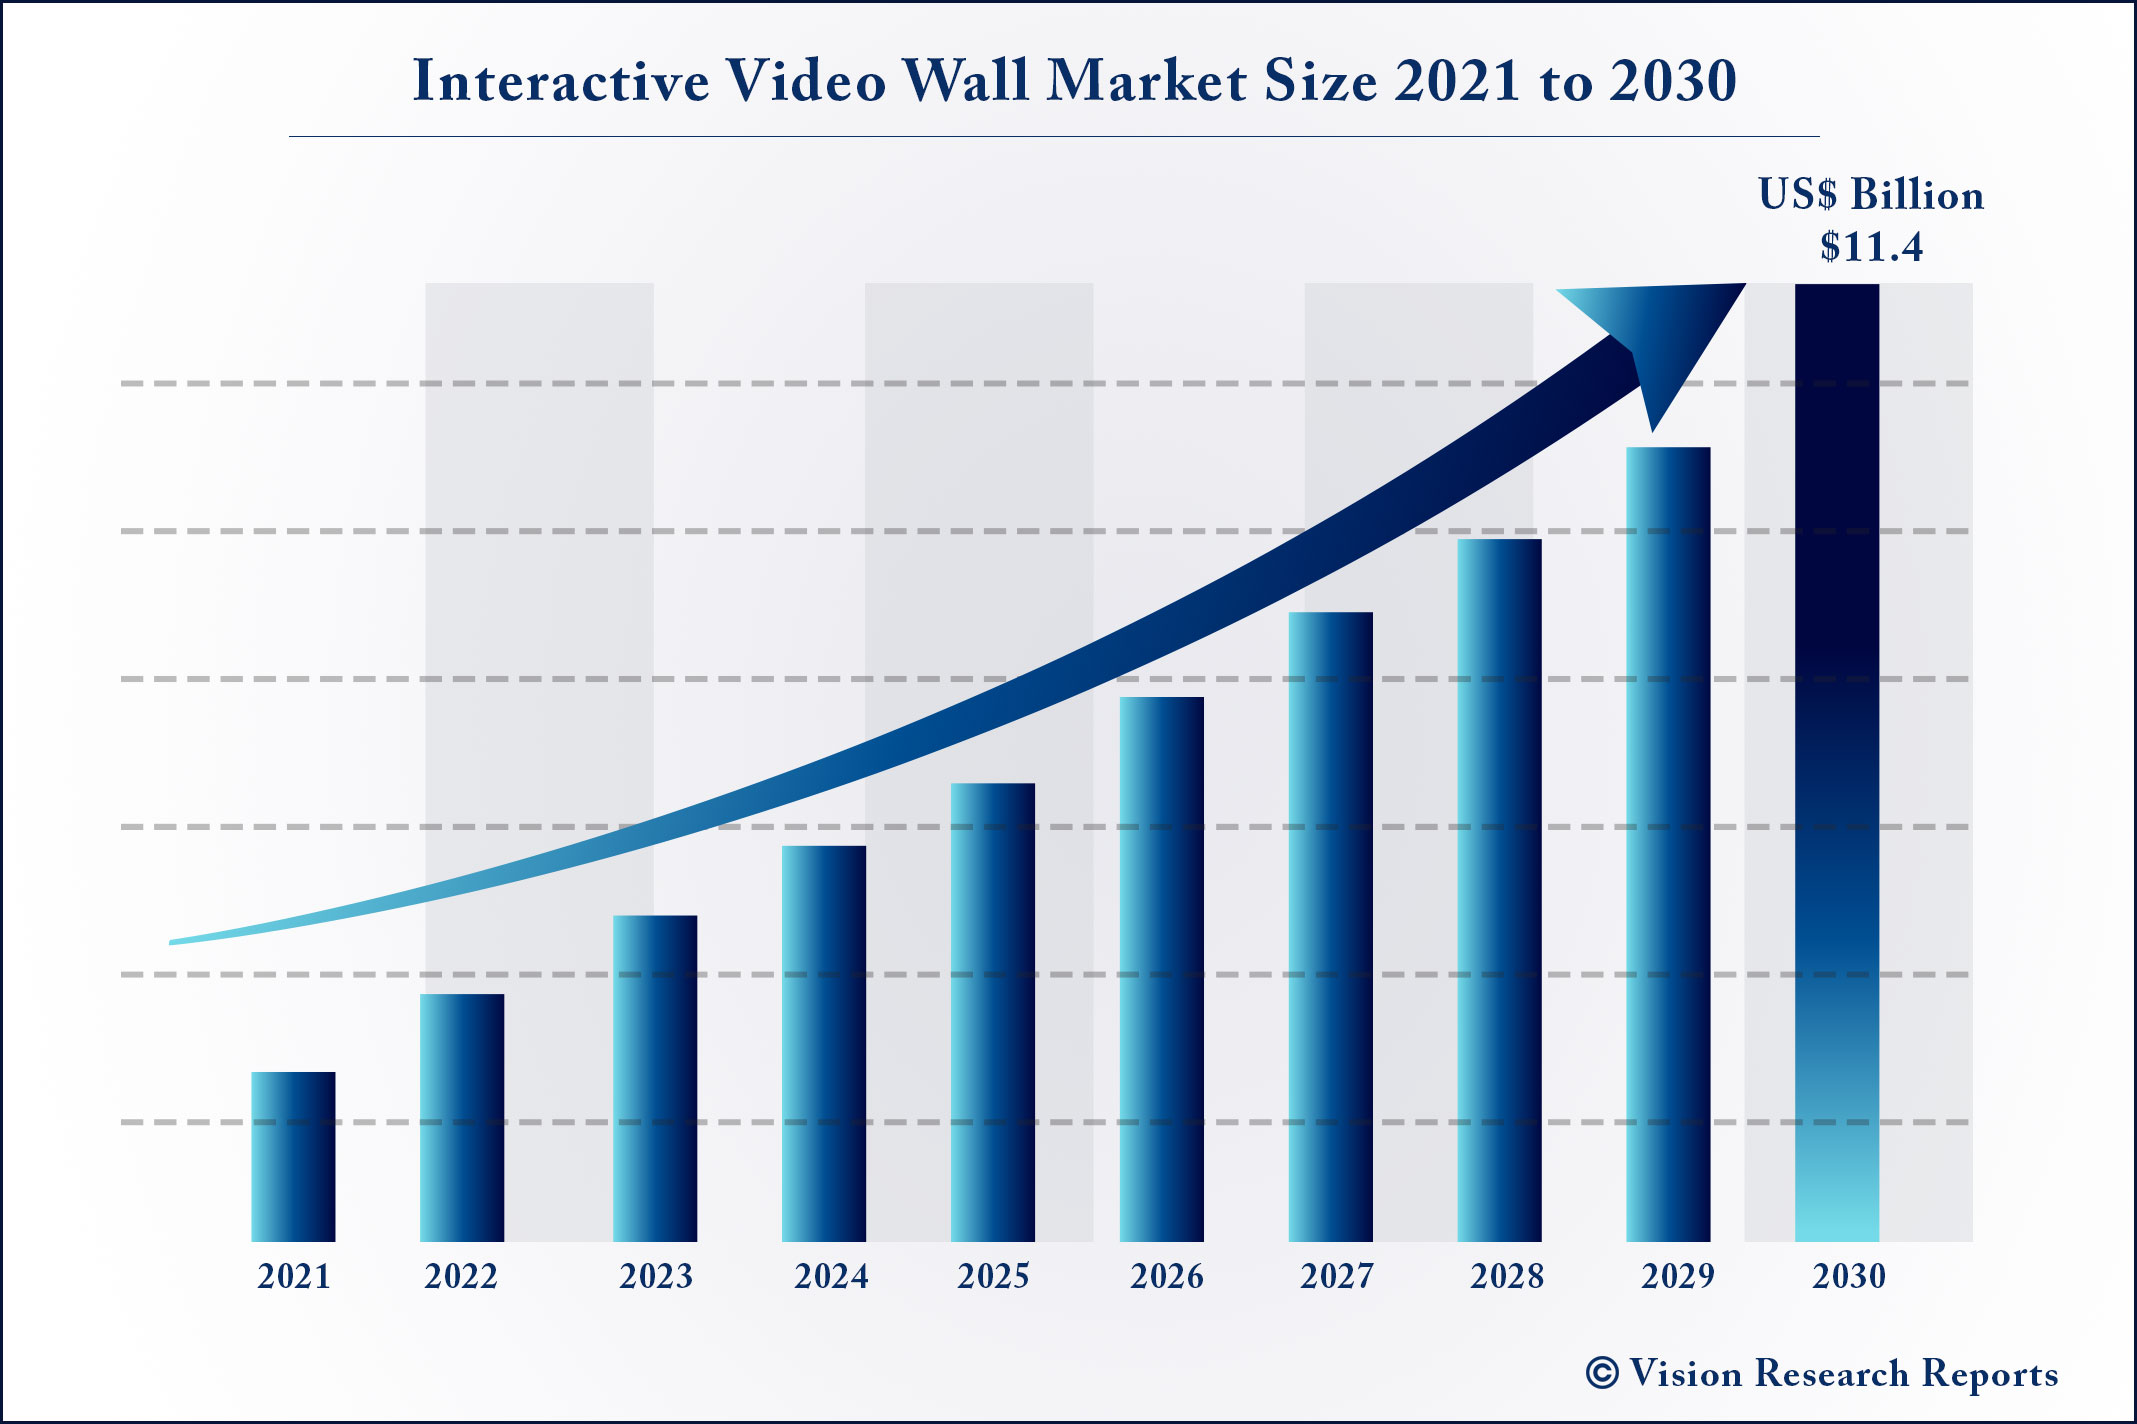 Interactive Video Wall Market Size 2021 to 2030